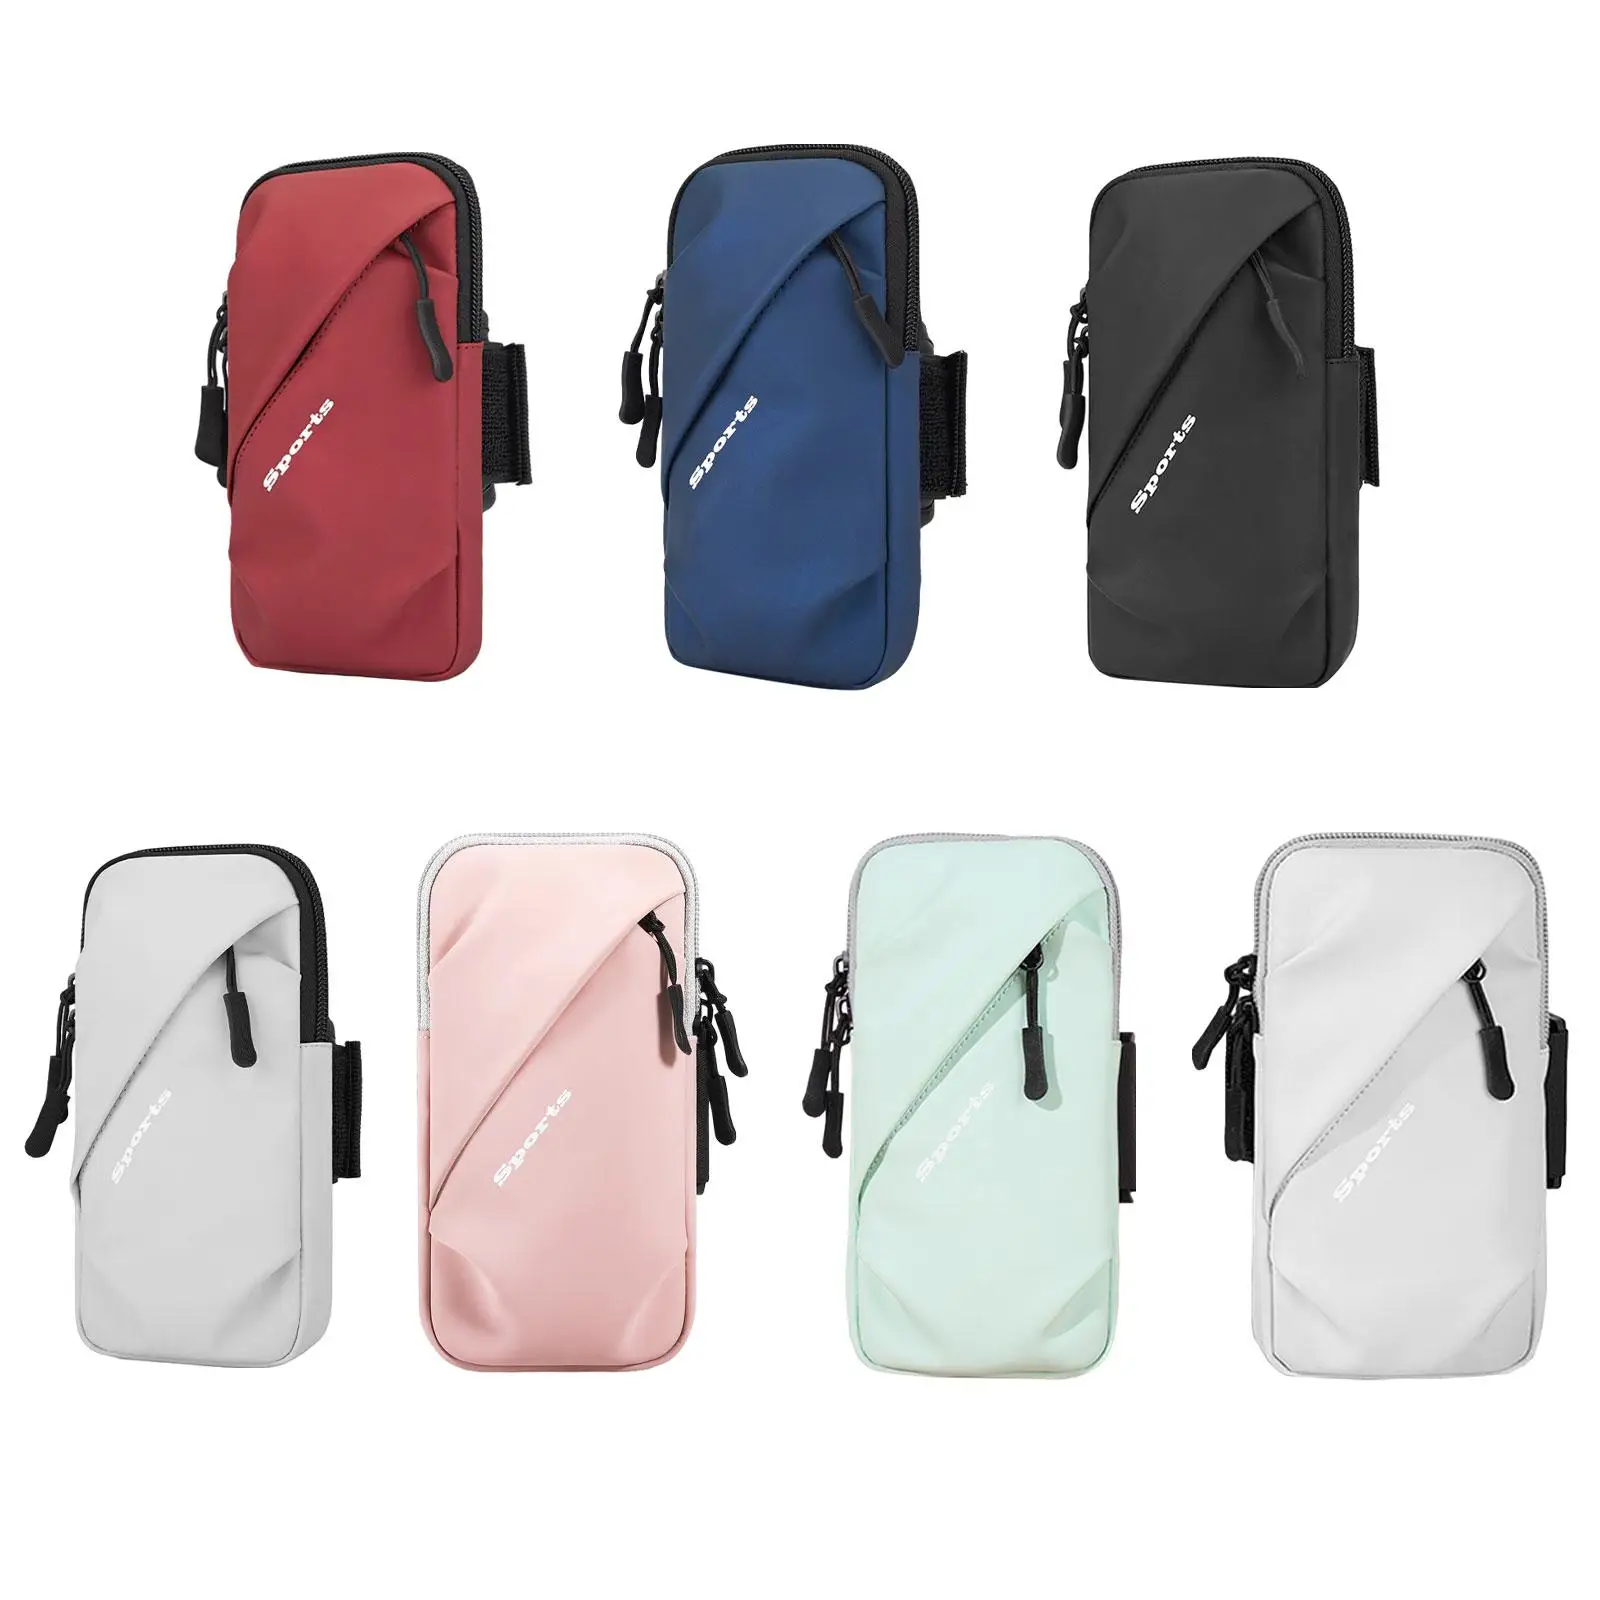 

Phone Arm Band Bag Women Men Cellphone Holder Phone Holder Pouch Case Wristband for Running Hiking Workout Exercise